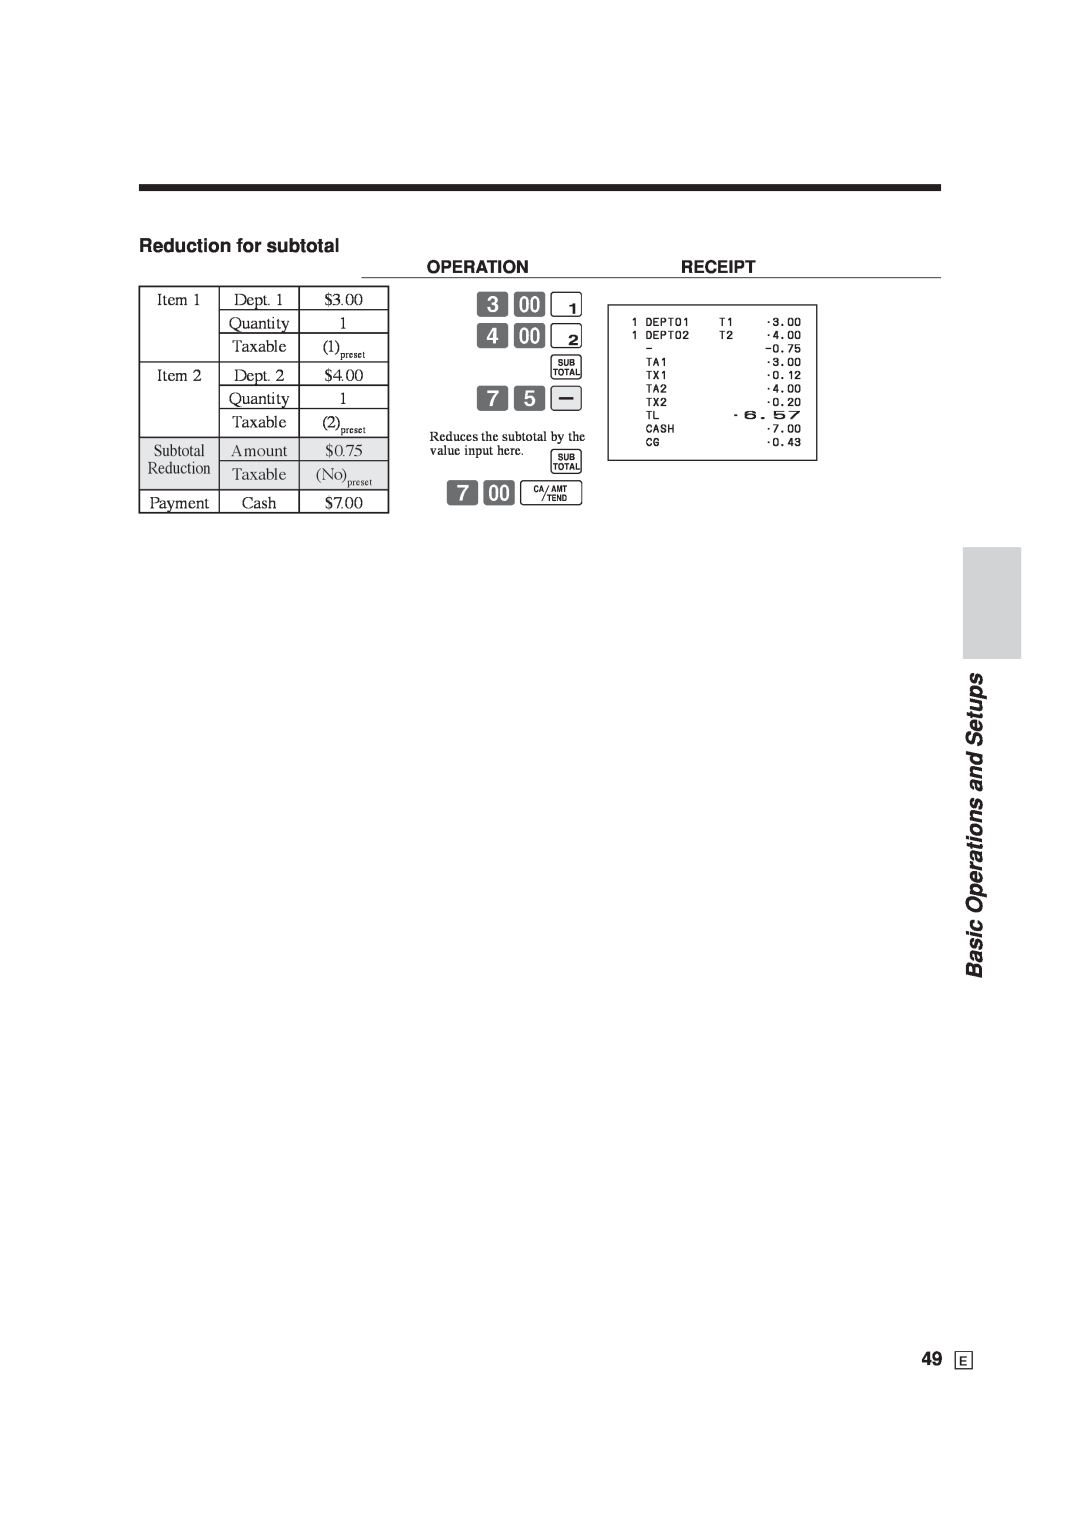 Casio SE-C6000, SE-S6000 user manual 4- s, Reduction for subtotal, Basic Operations and Setups 